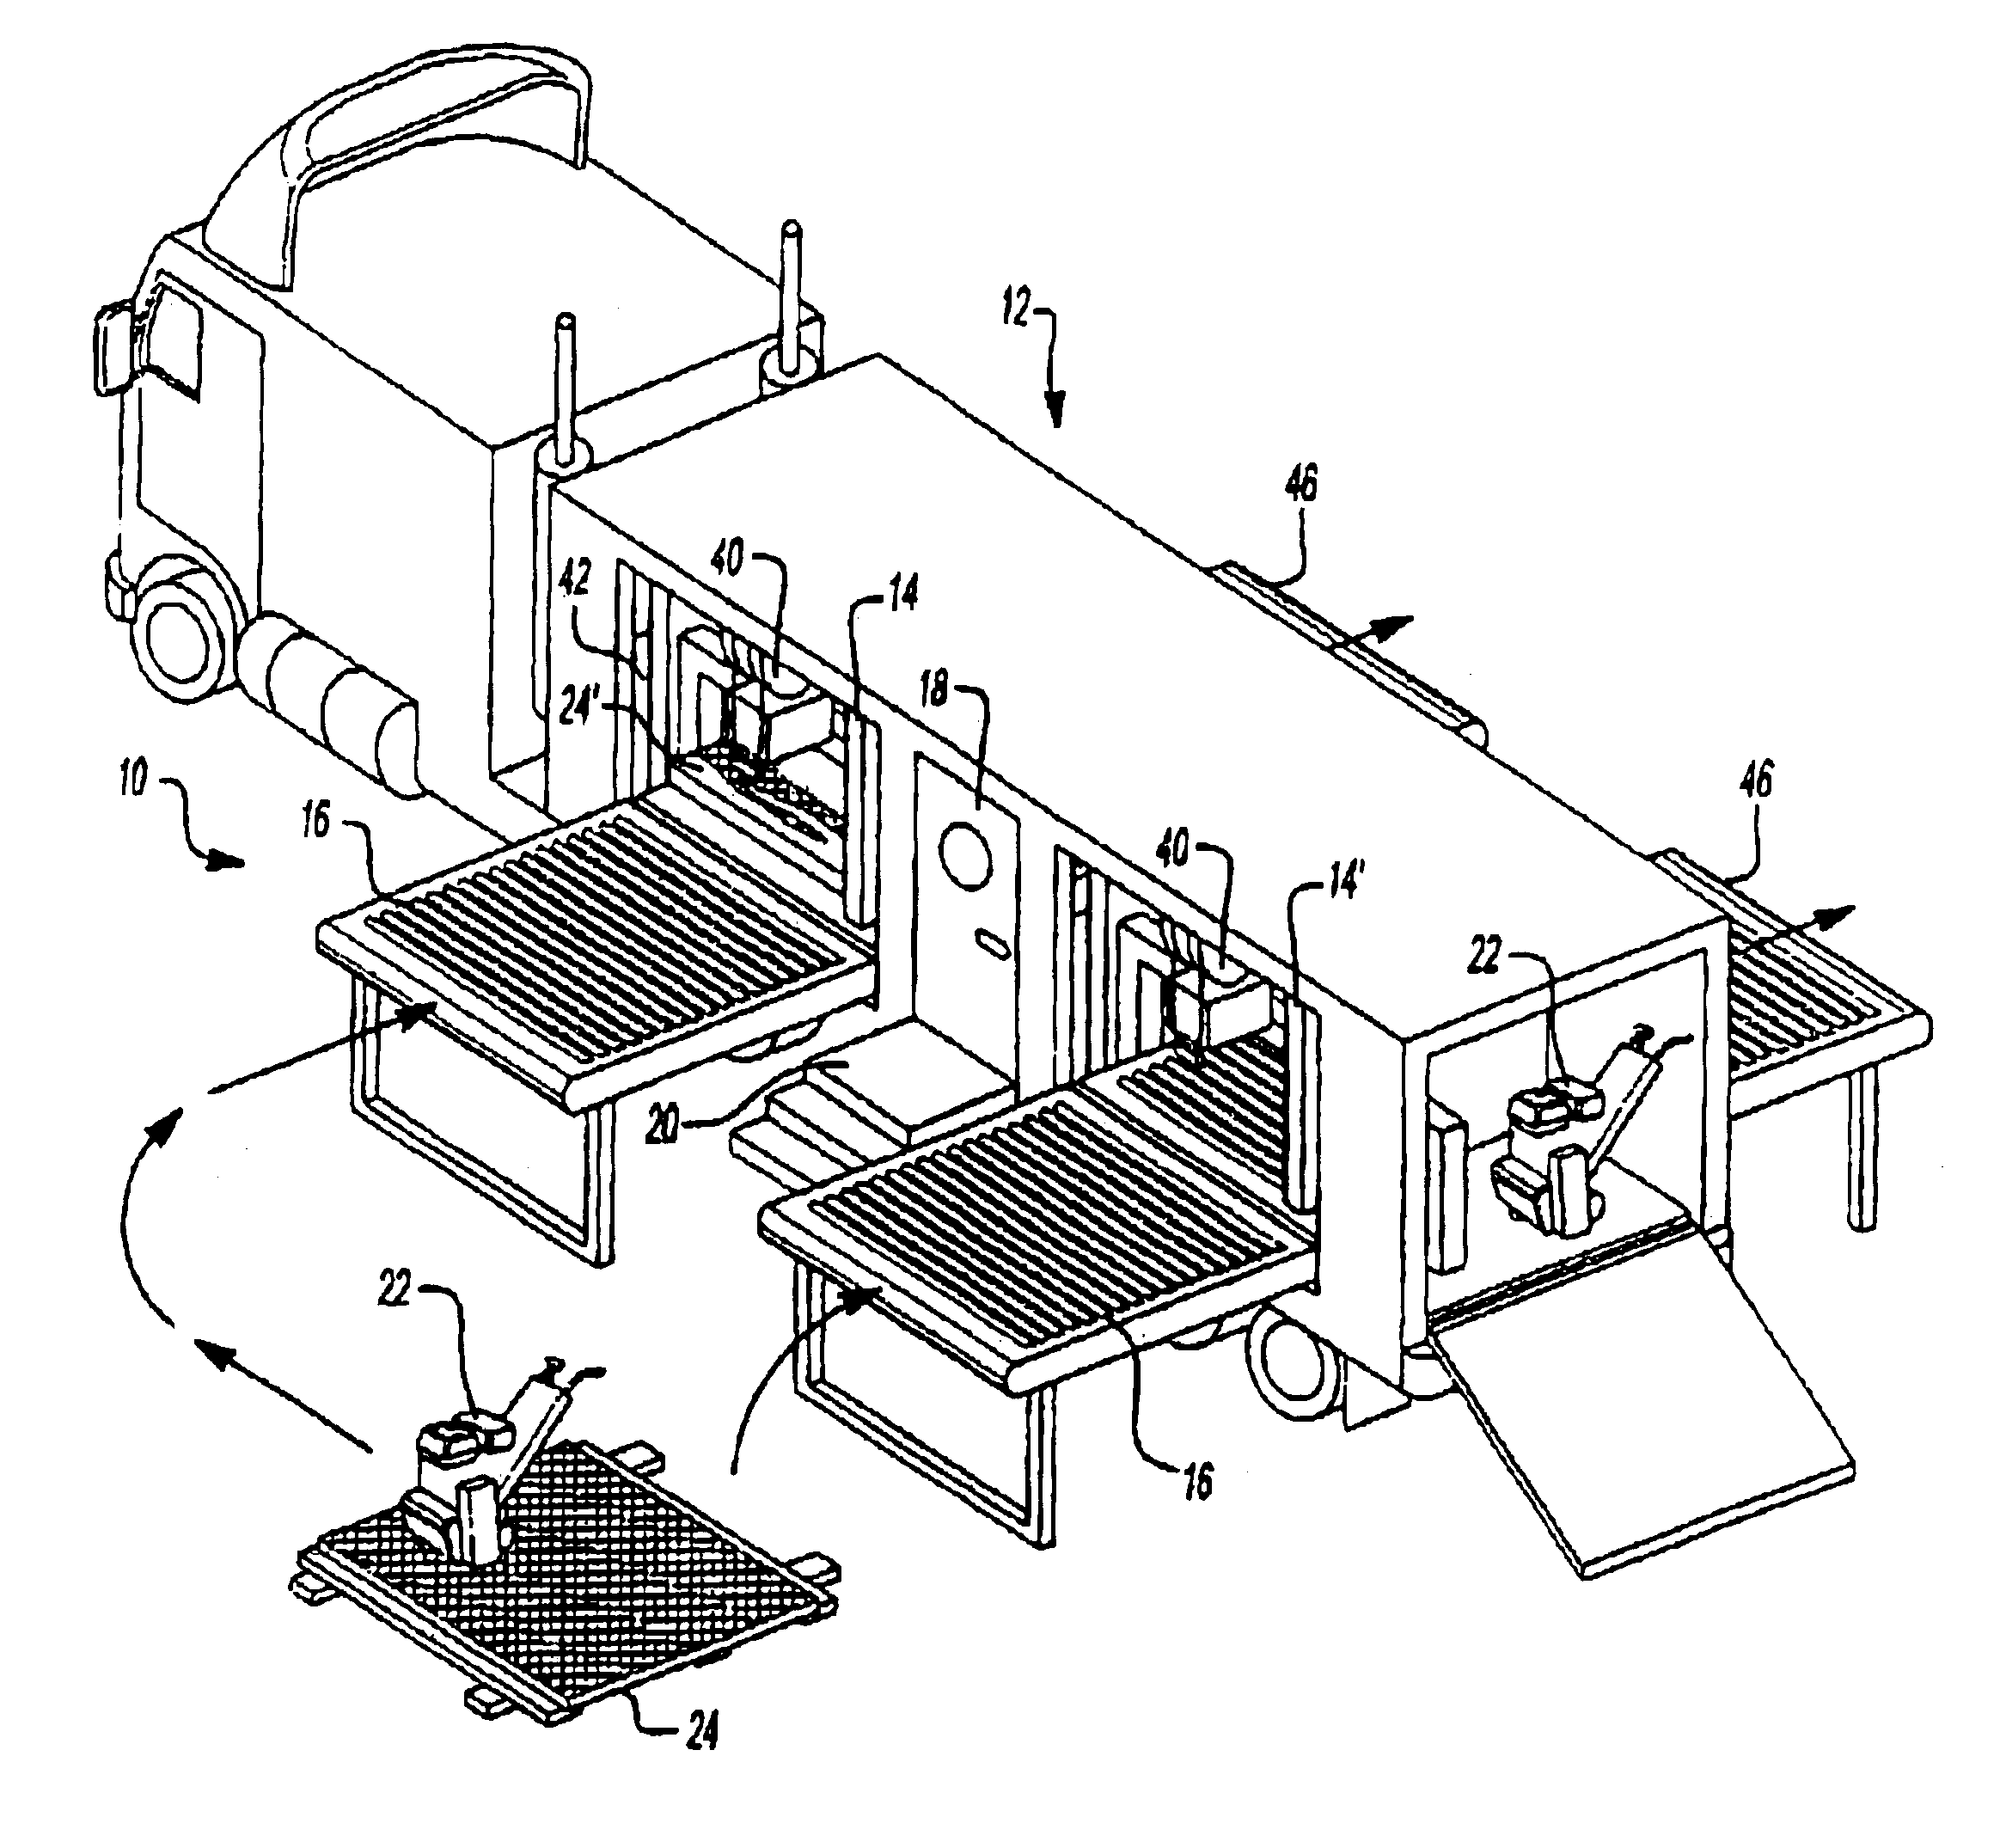 Portable manufacturing facility for manufacturing anti-slip flooring and method of manufacturing